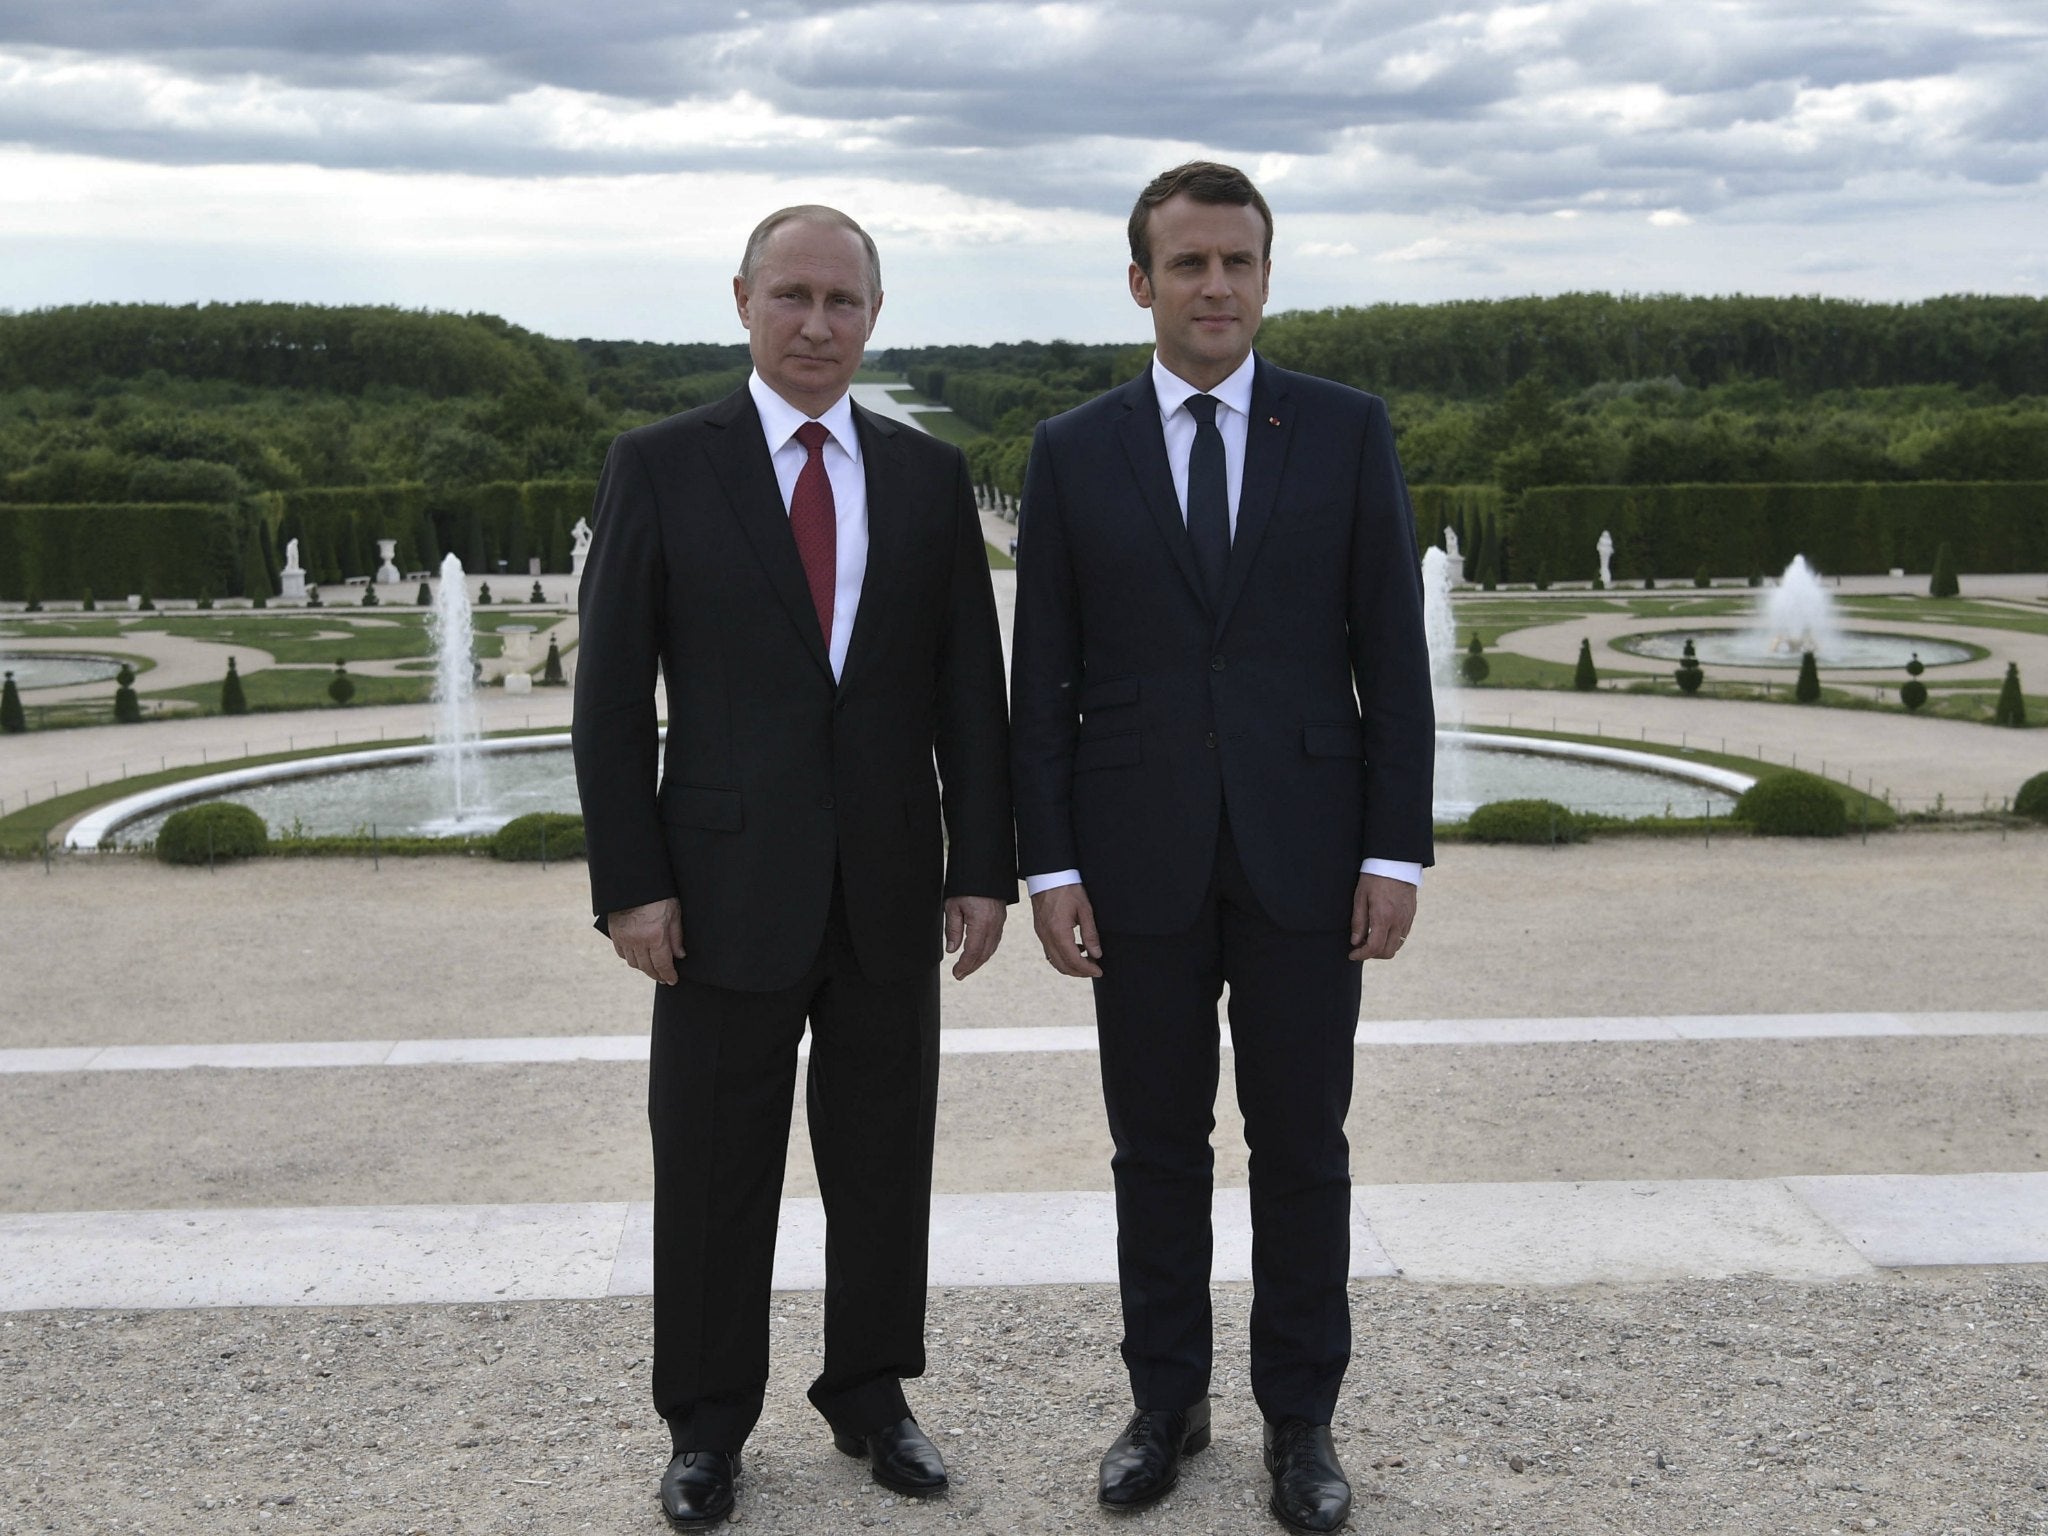 French President Emmanuel Macron, right, and Russian President Vladimir Putin in the gardens of the Chateau de Versailles